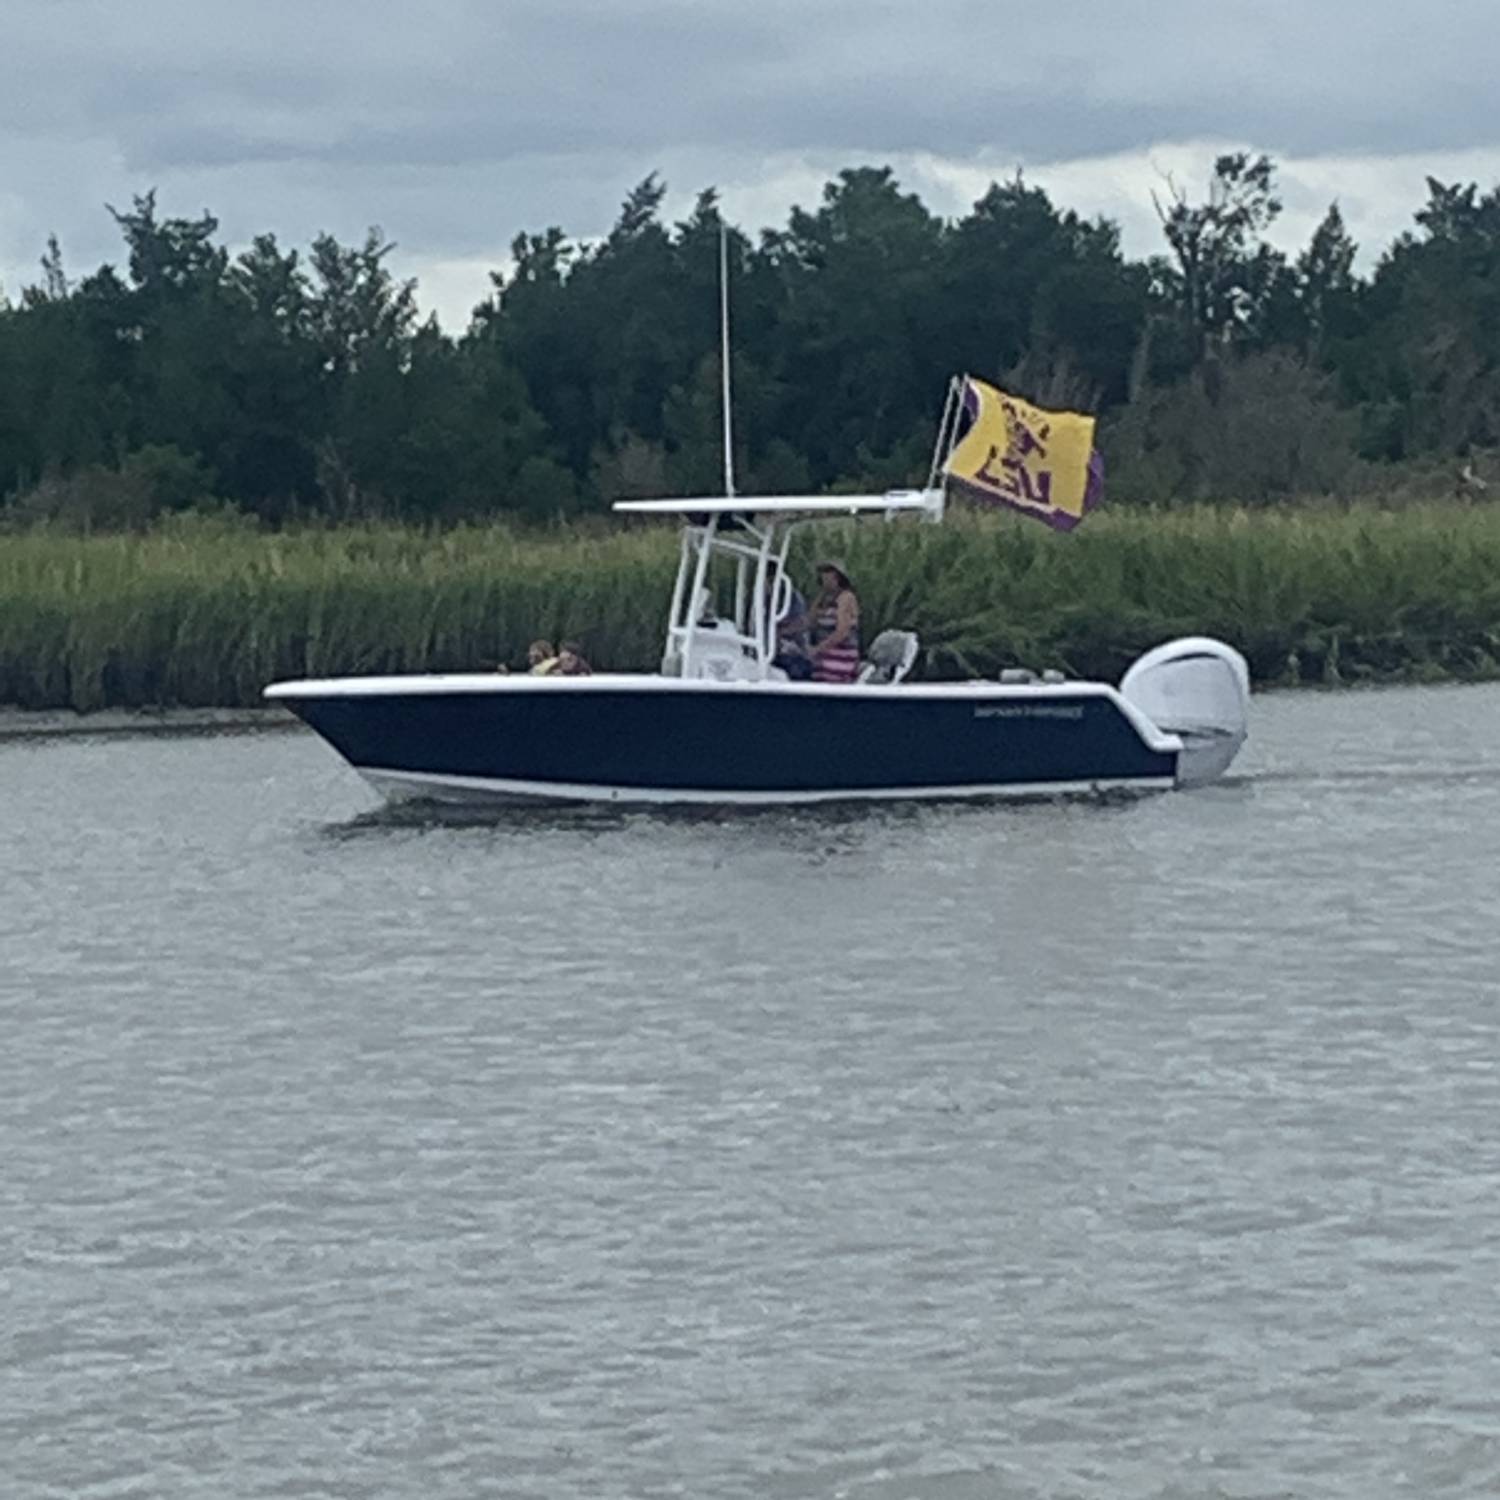 Title: Water Trip to Lake Moultrie from Charleston Harbor - On board their Sportsman Heritage 231 Center Console - Location: Charleston Harbor. Participating in the Photo Contest #SportsmanSeptember2021